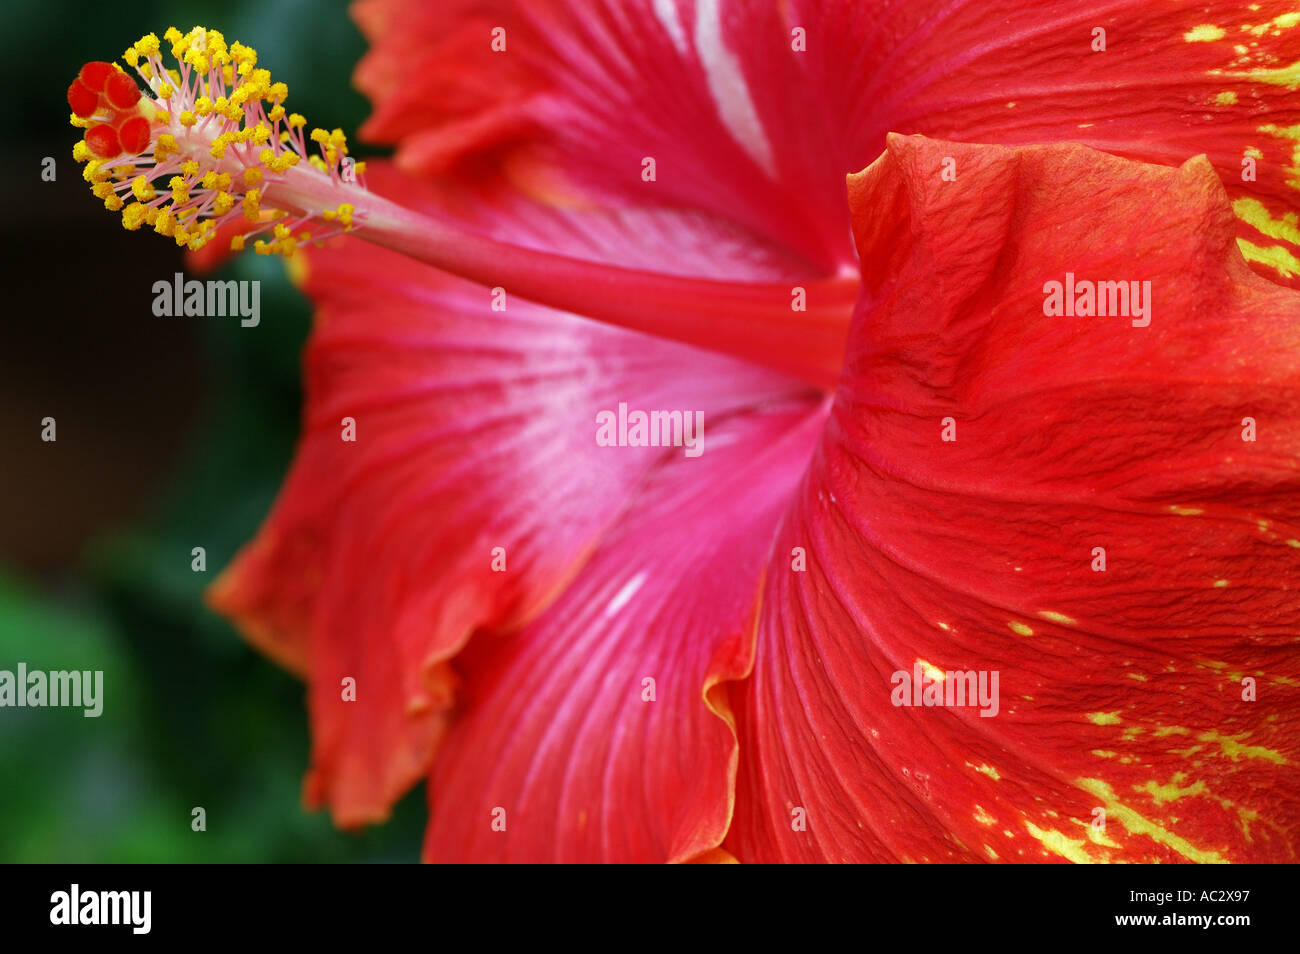 Red and yellow hibiscus flower close up Stock Photo